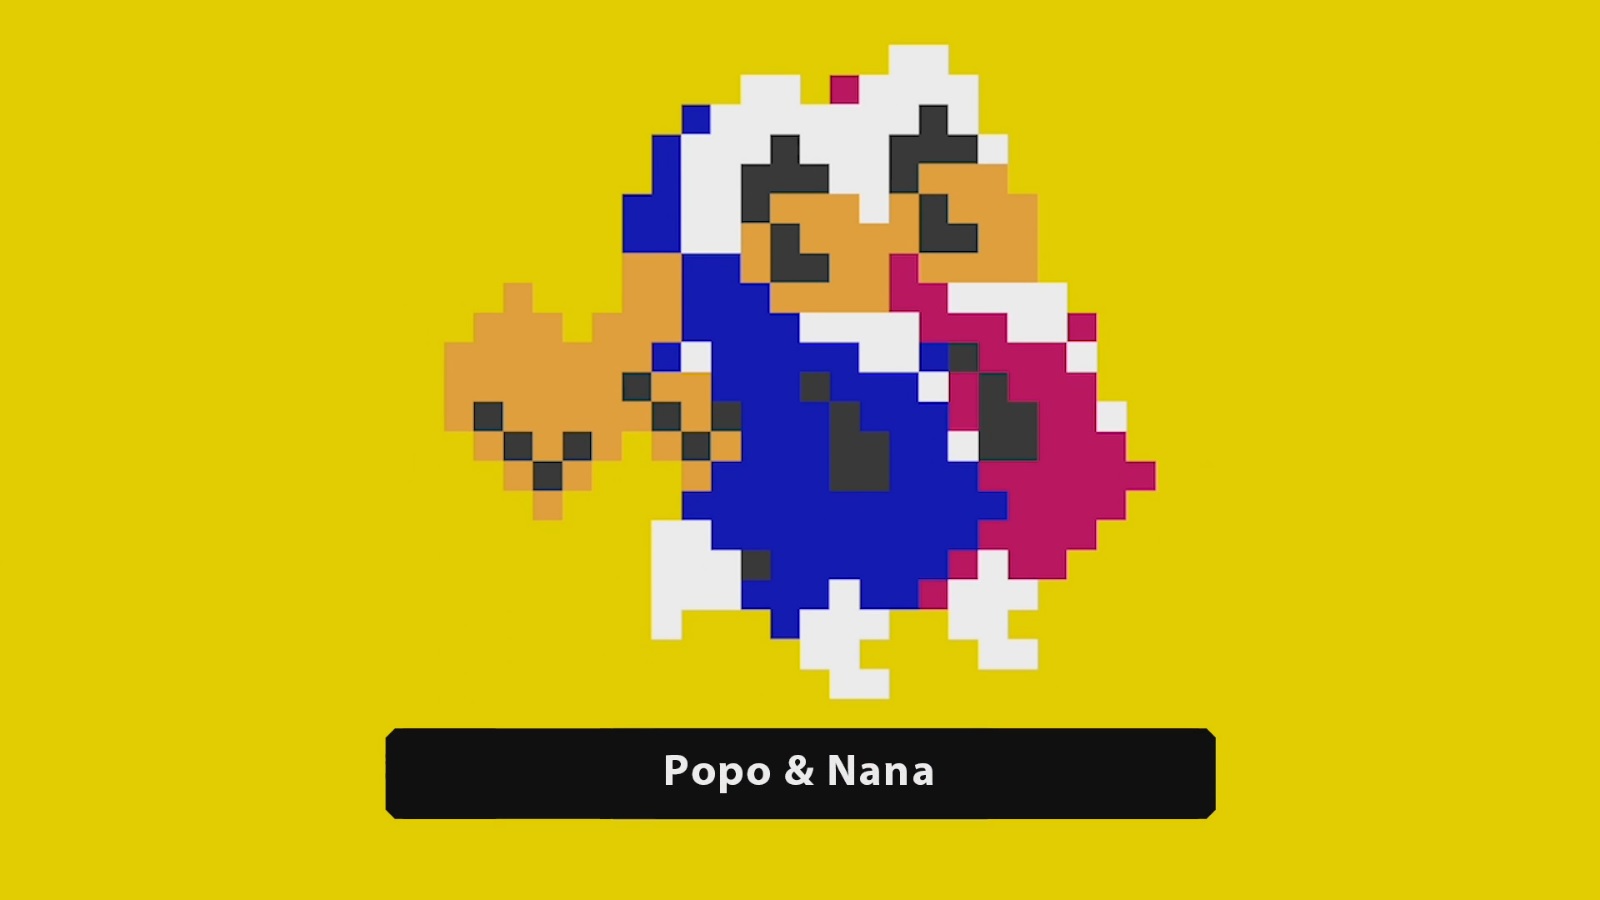 Super Mario Maker - Ice Climbers costume and Event Course now live.